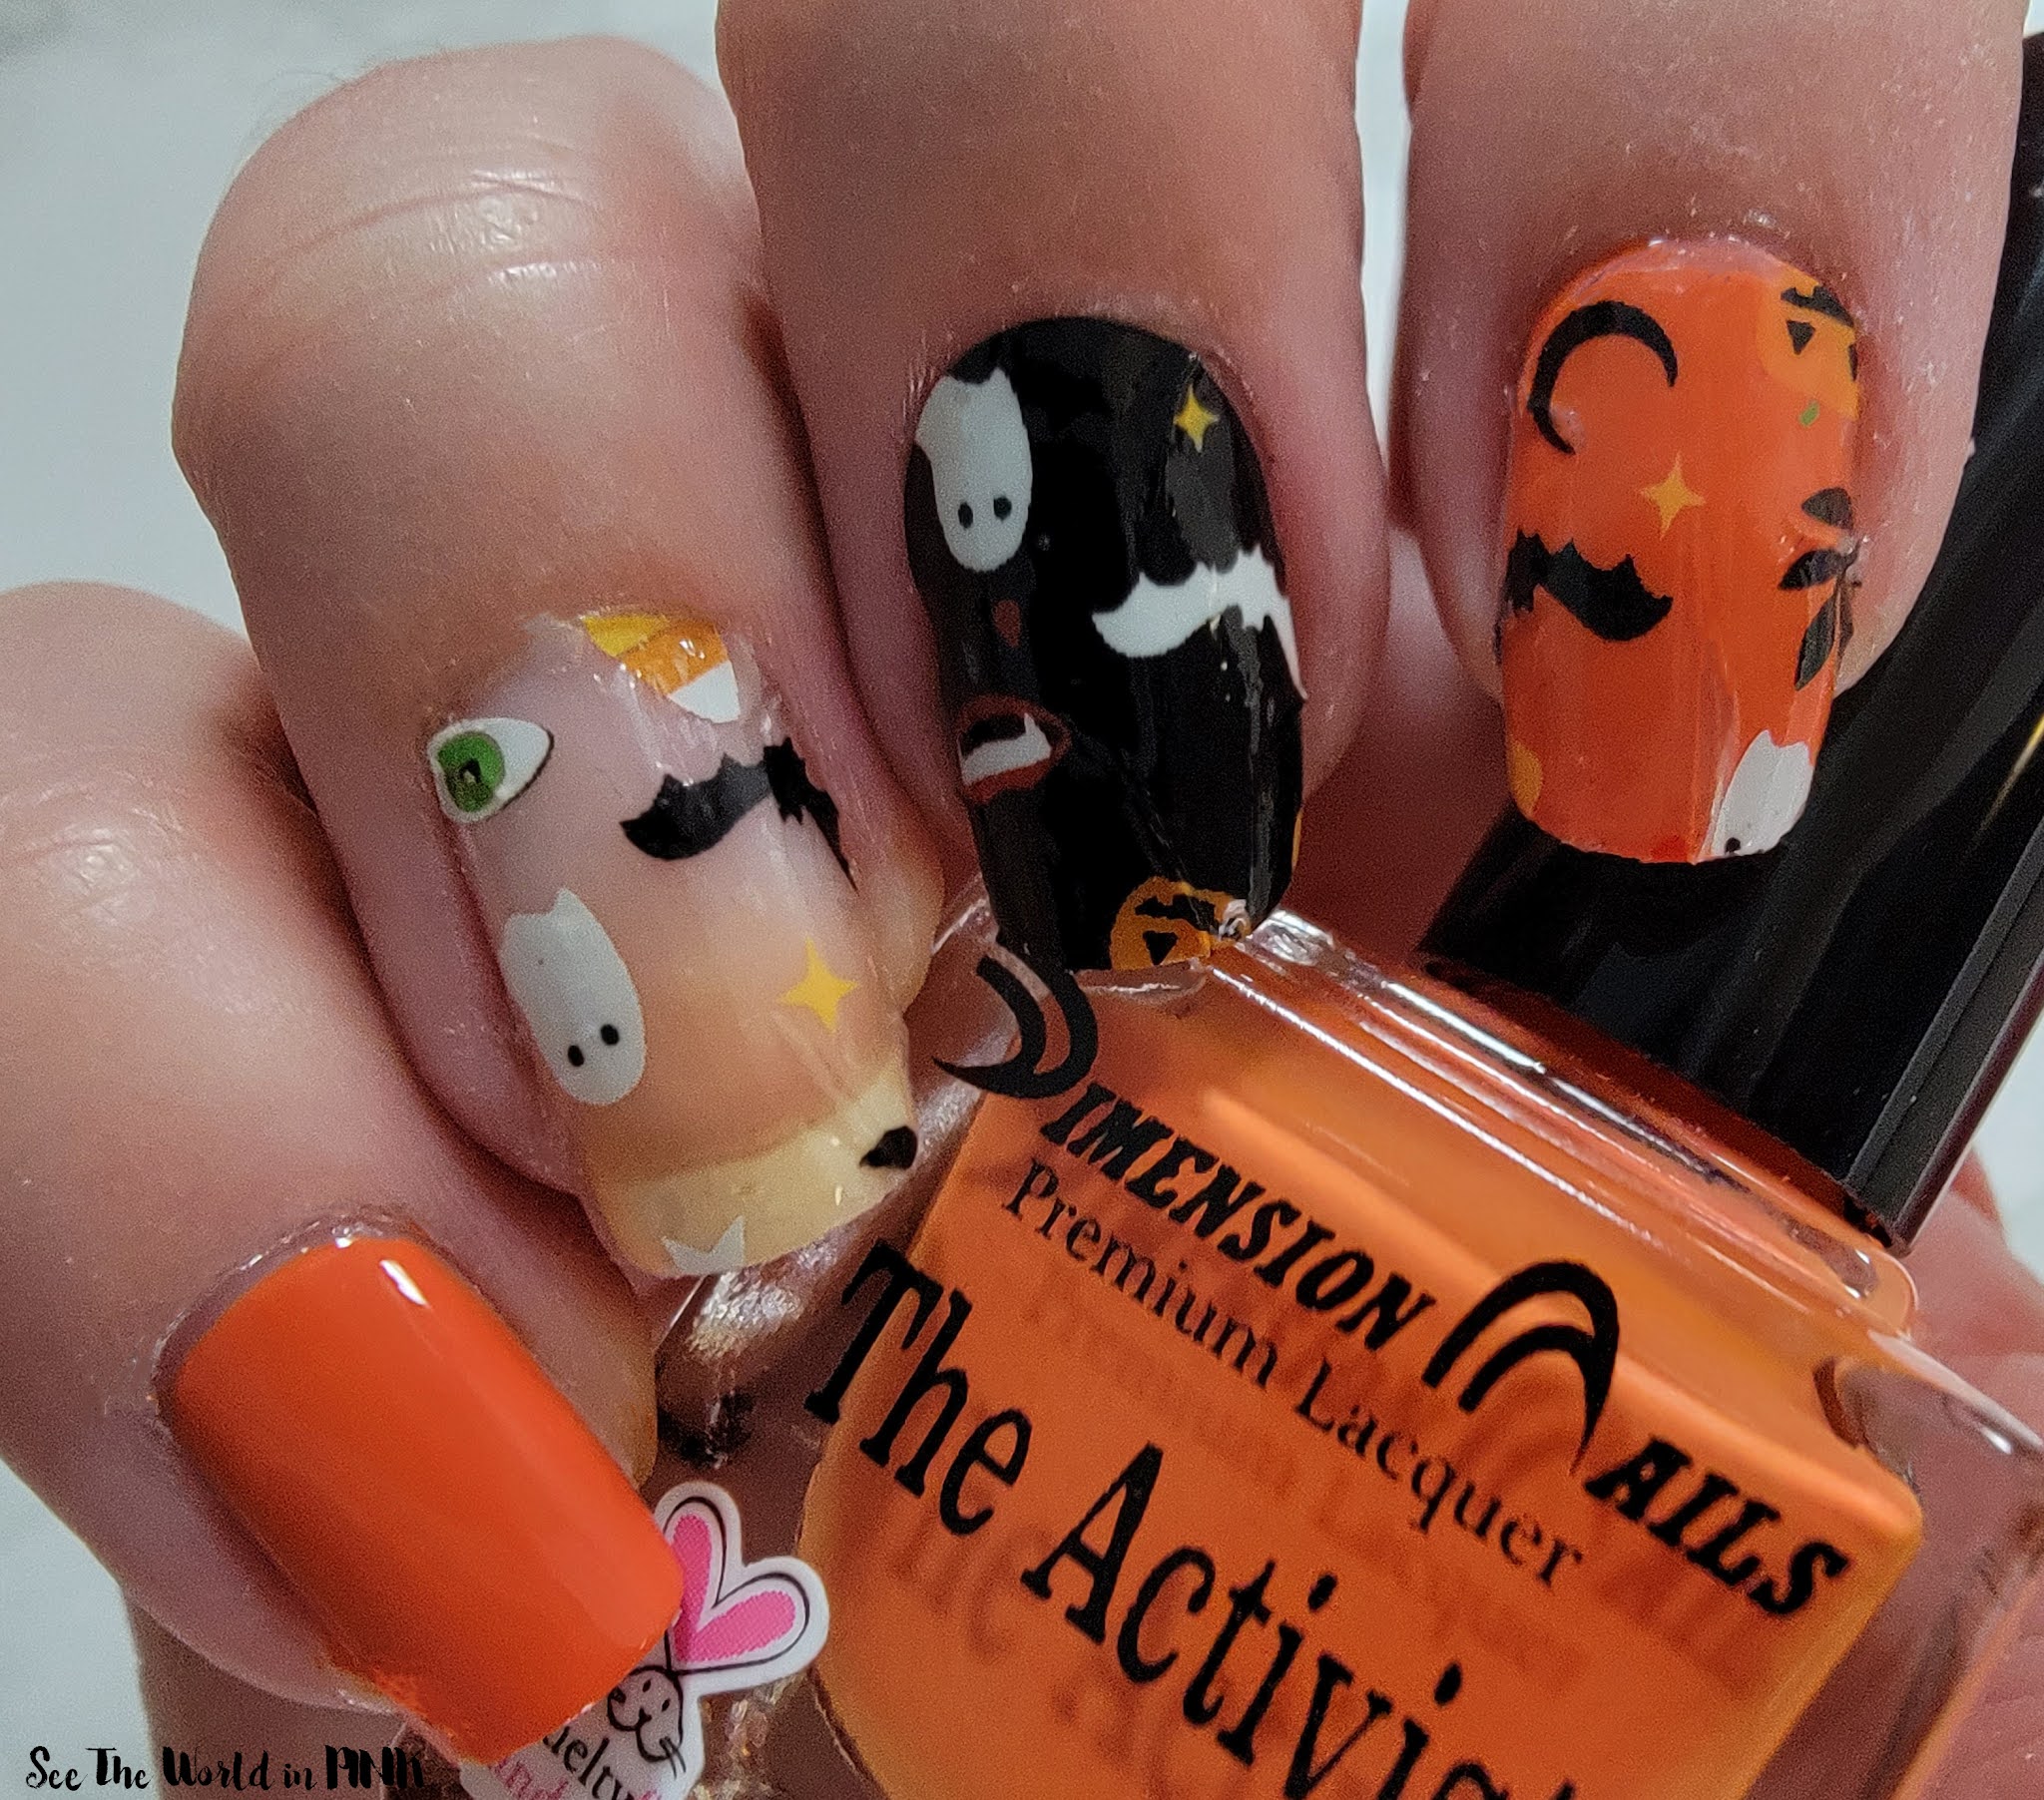 Manicure Monday - Boo, Cute Halloween Nails